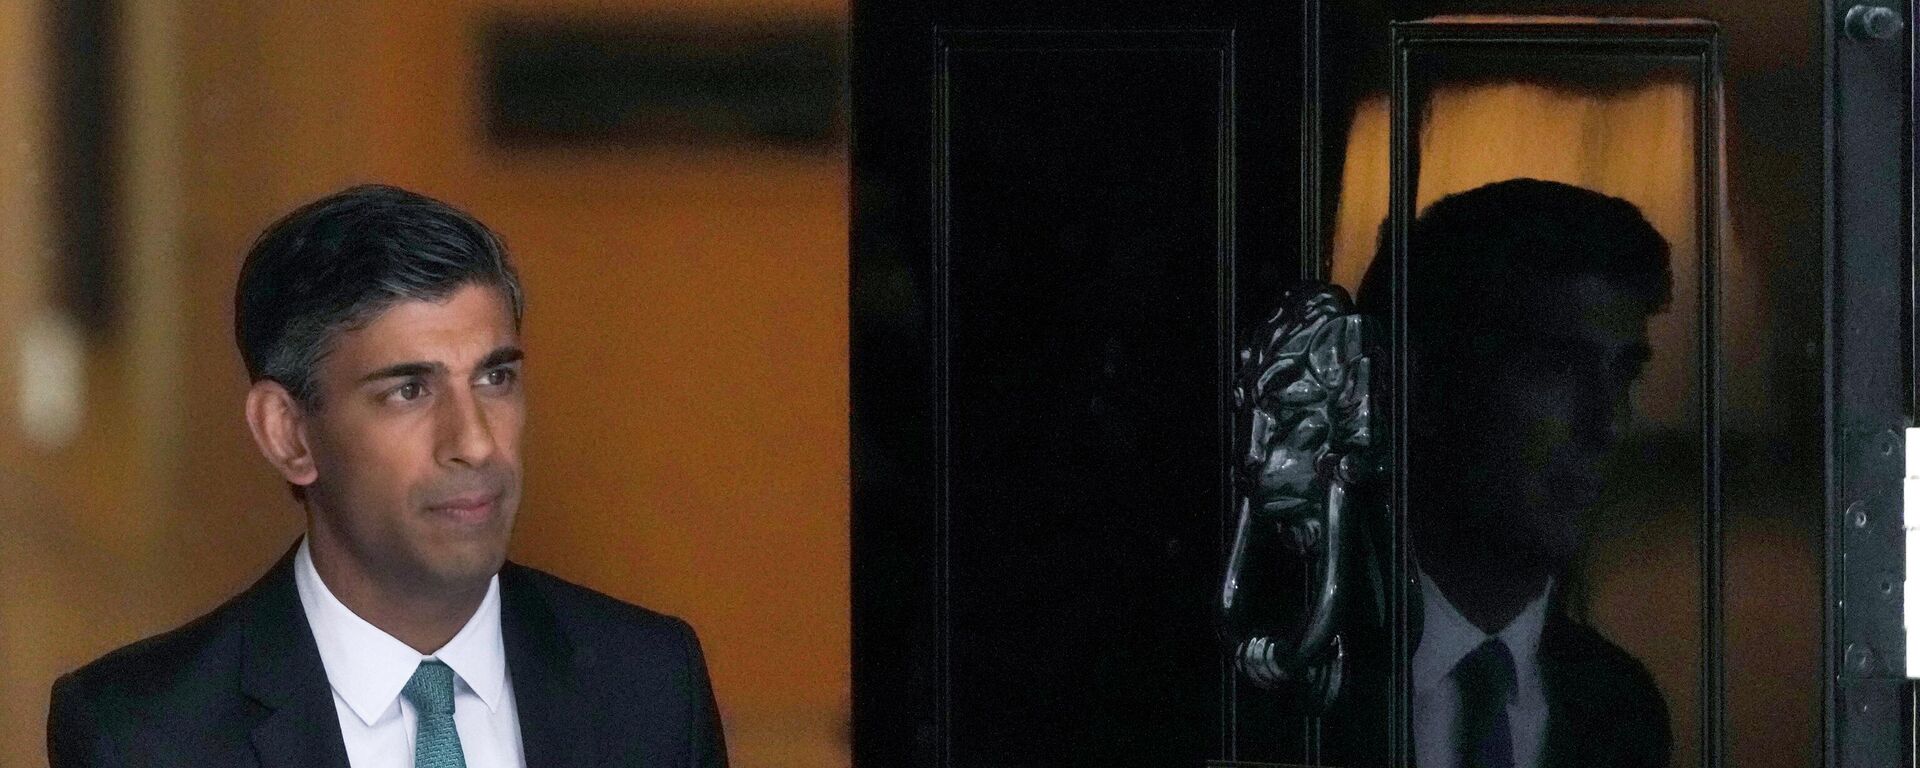 Britain's Prime Minister Rishi Sunak leaves 10 Downing Street for the House of Commons for his first Prime Minister's Questions in London, Wednesday, Oct. 26, 2022. - Sputnik International, 1920, 14.03.2023